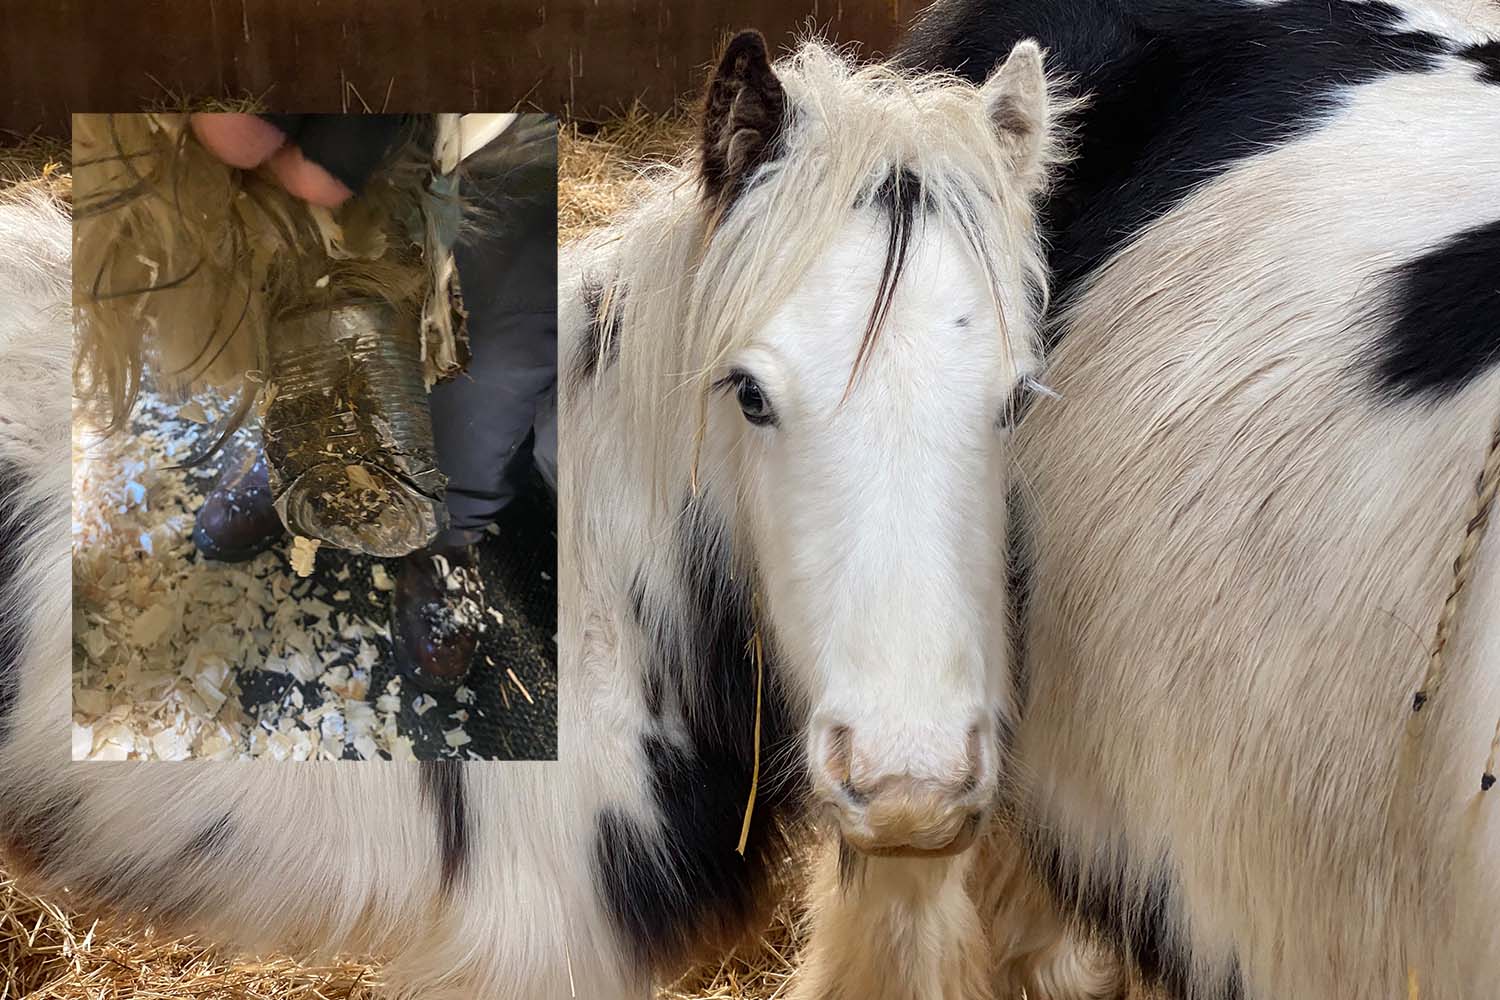 Disbelief at what was on rescued foal’s foot